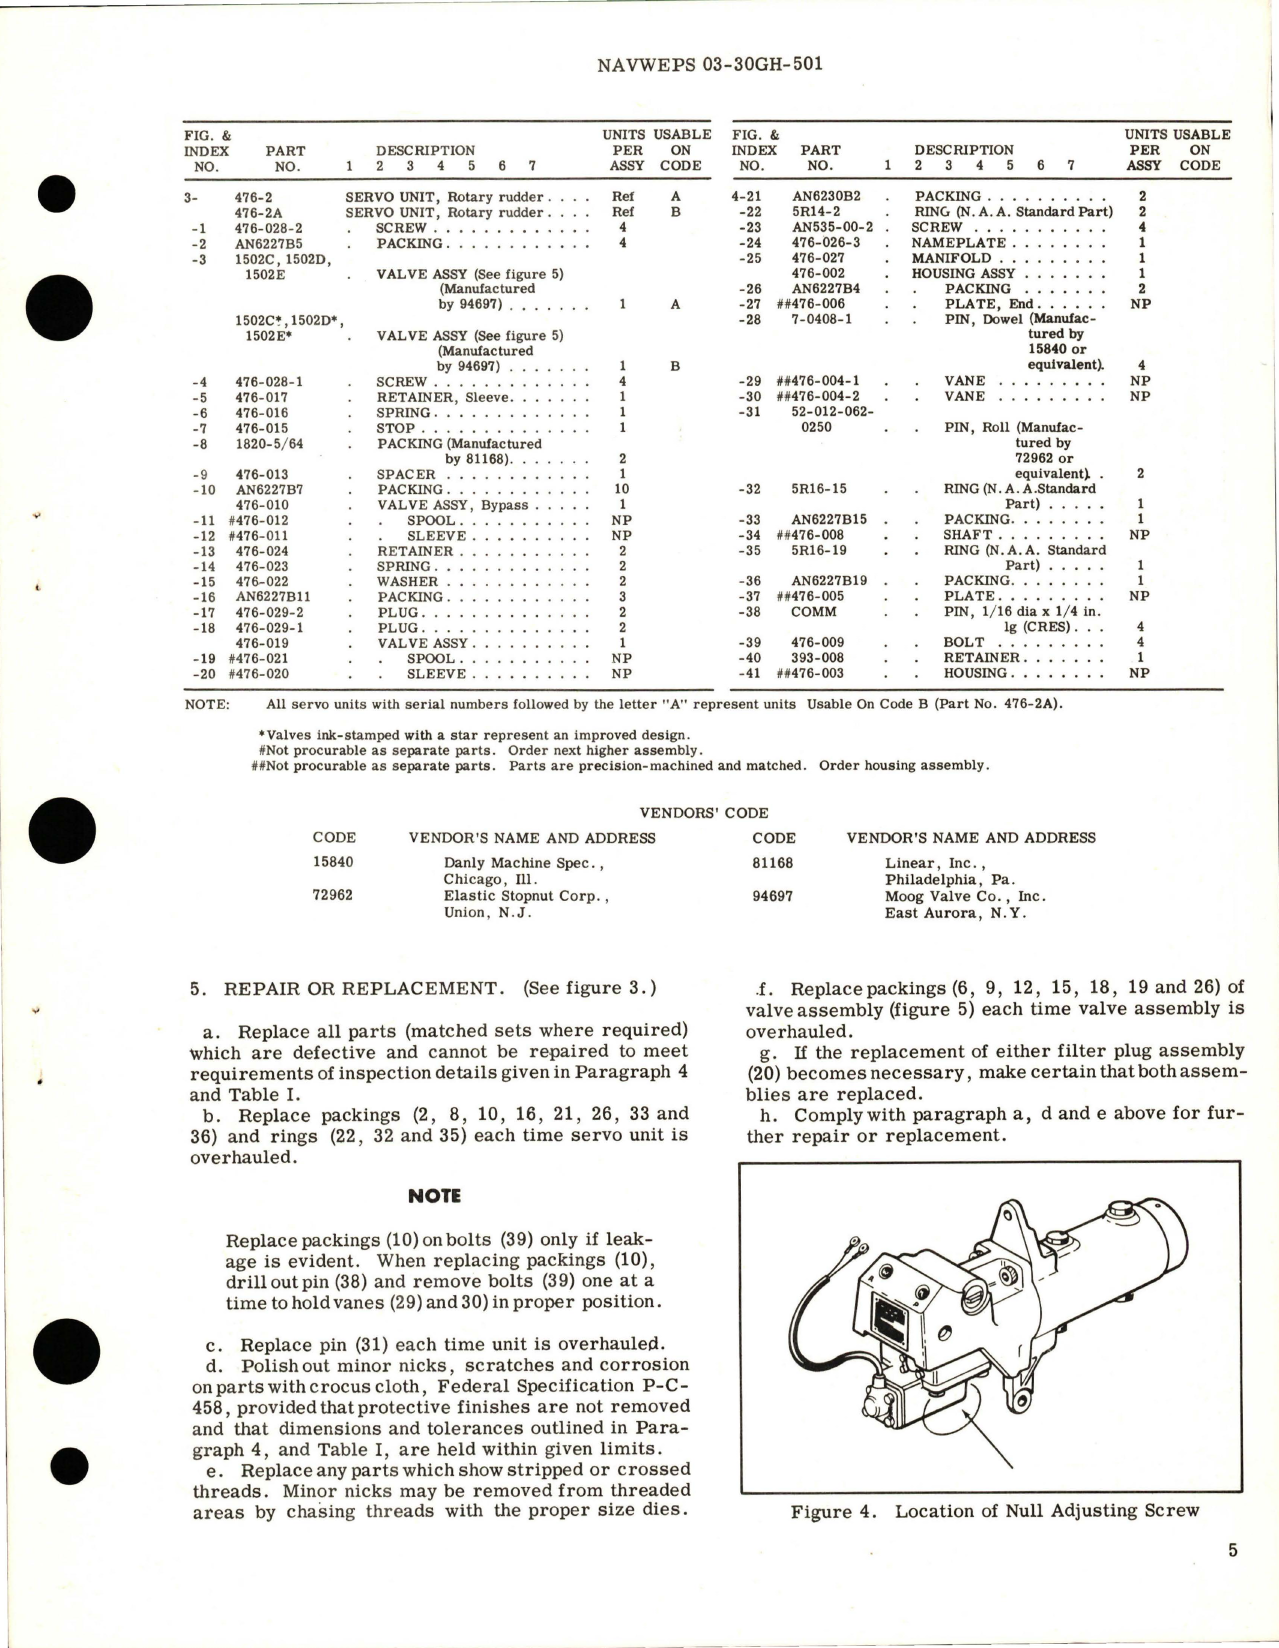 Sample page 5 from AirCorps Library document: Overhaul Instructions with Parts Breakdown for Rotary Rudder Servo Unit - Part 476-2 and 476-2A